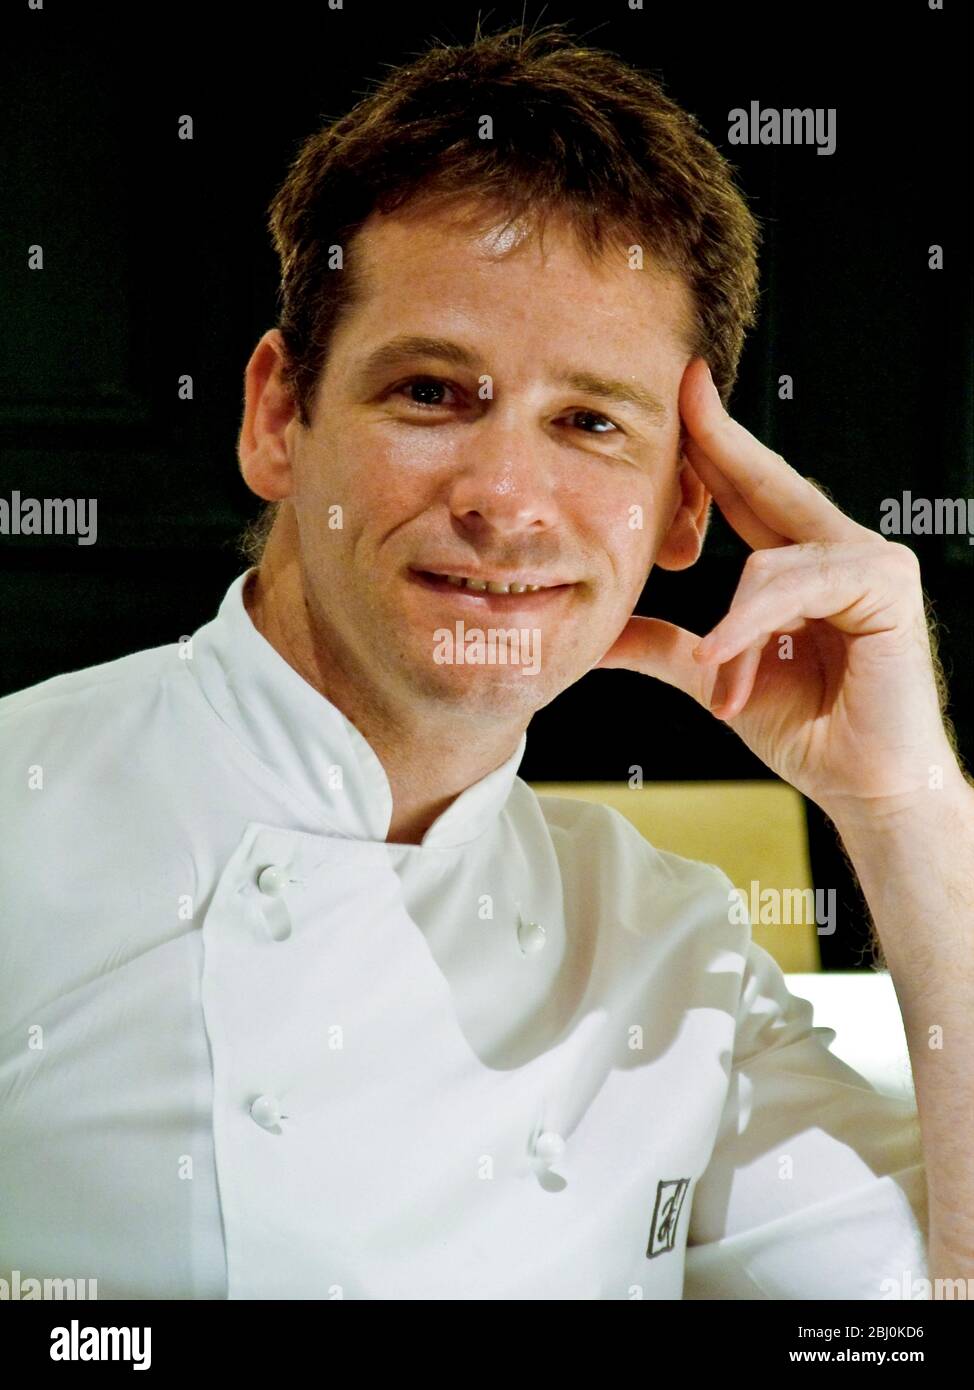 Chef Andrew Fairlie at Gleneagles hotel. - Stock Photo